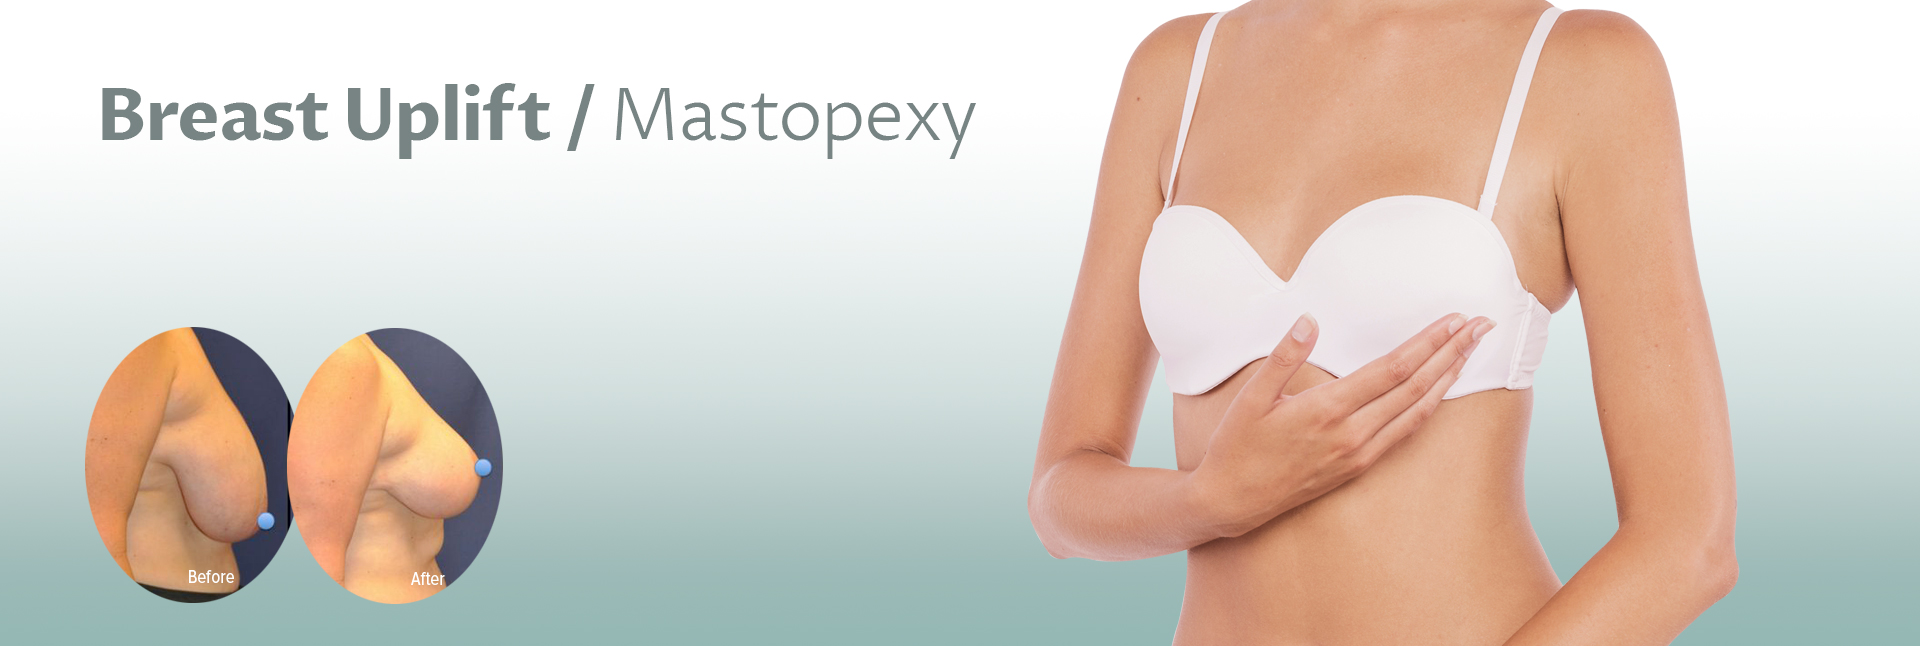 Breast Up Lift Surgery  Mastopexy or Breast Lift Cost London